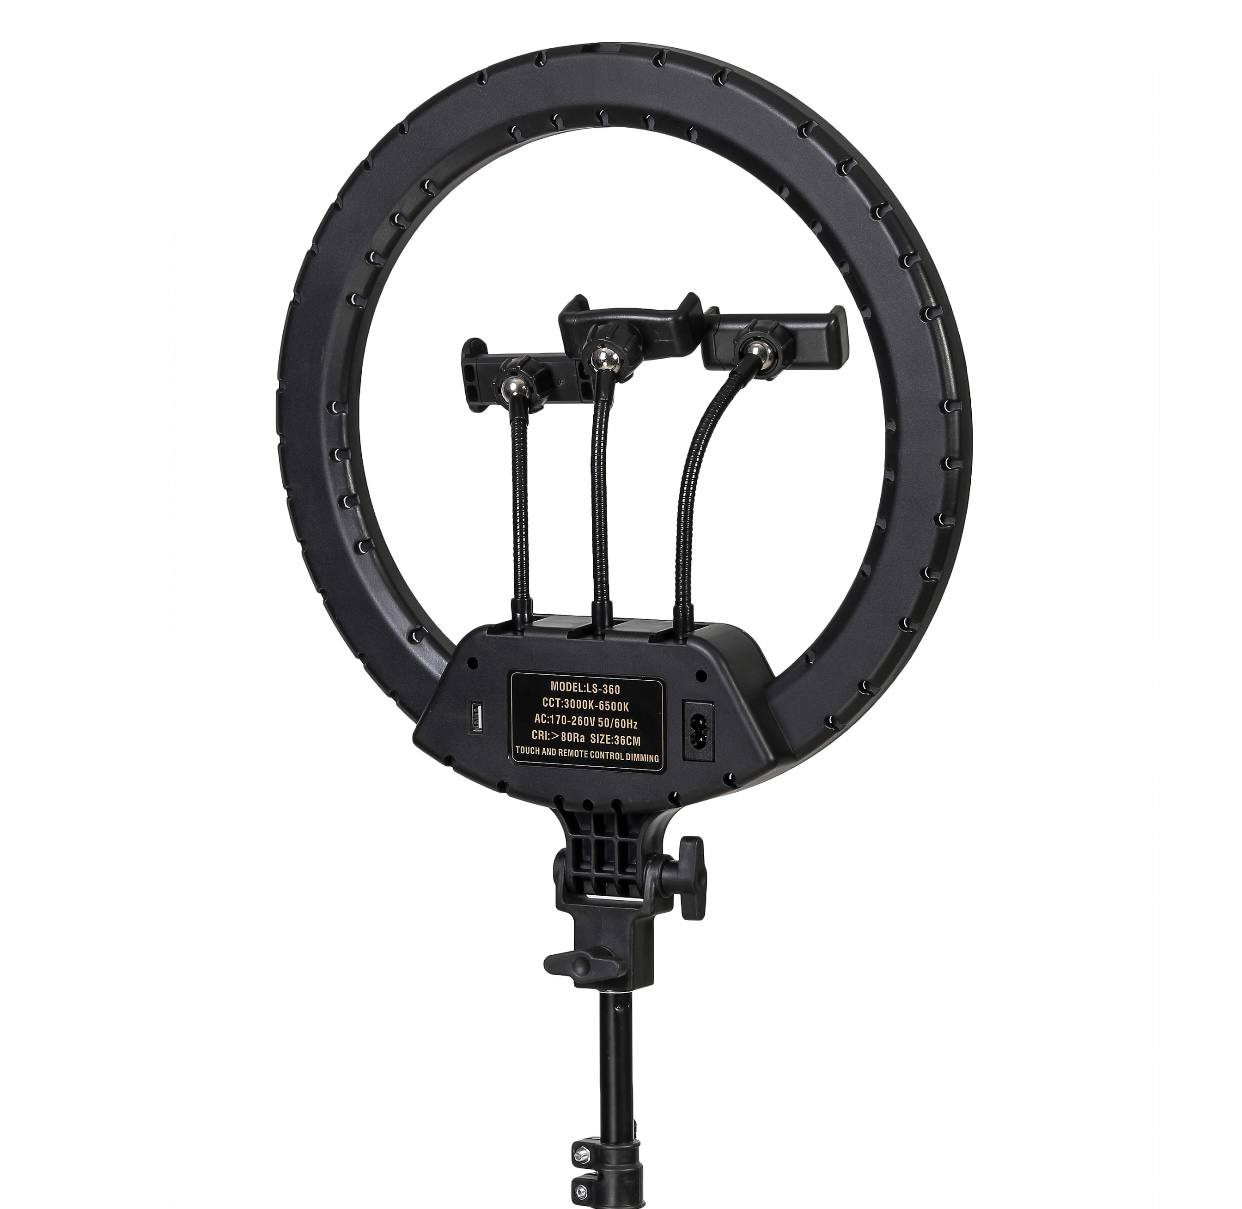 14 Inch LED Selfie ring light with stand price